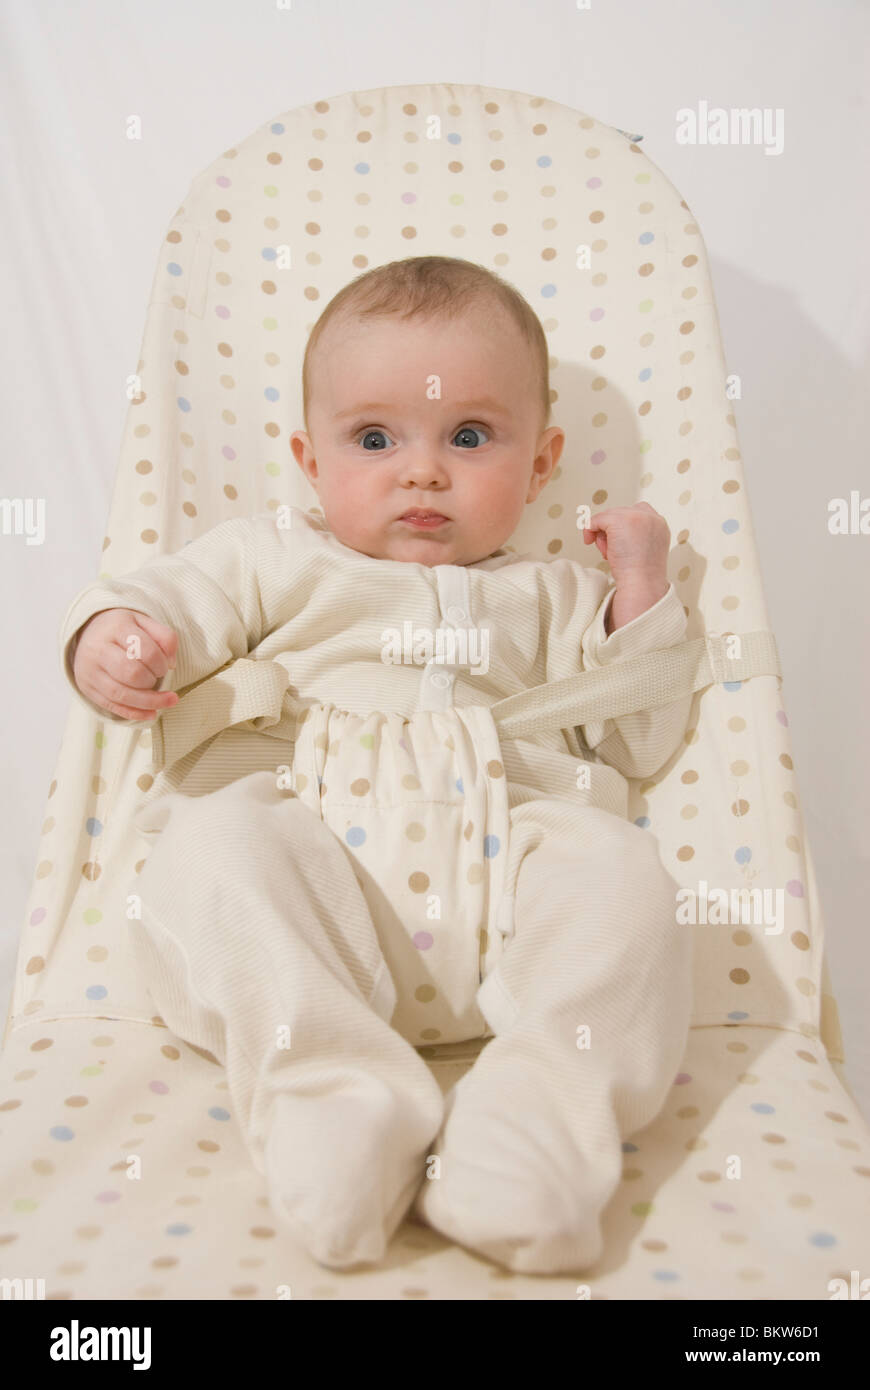 Portrait of Baby Girl Sitting in Spotted in Bouncer Chair Stock Photo